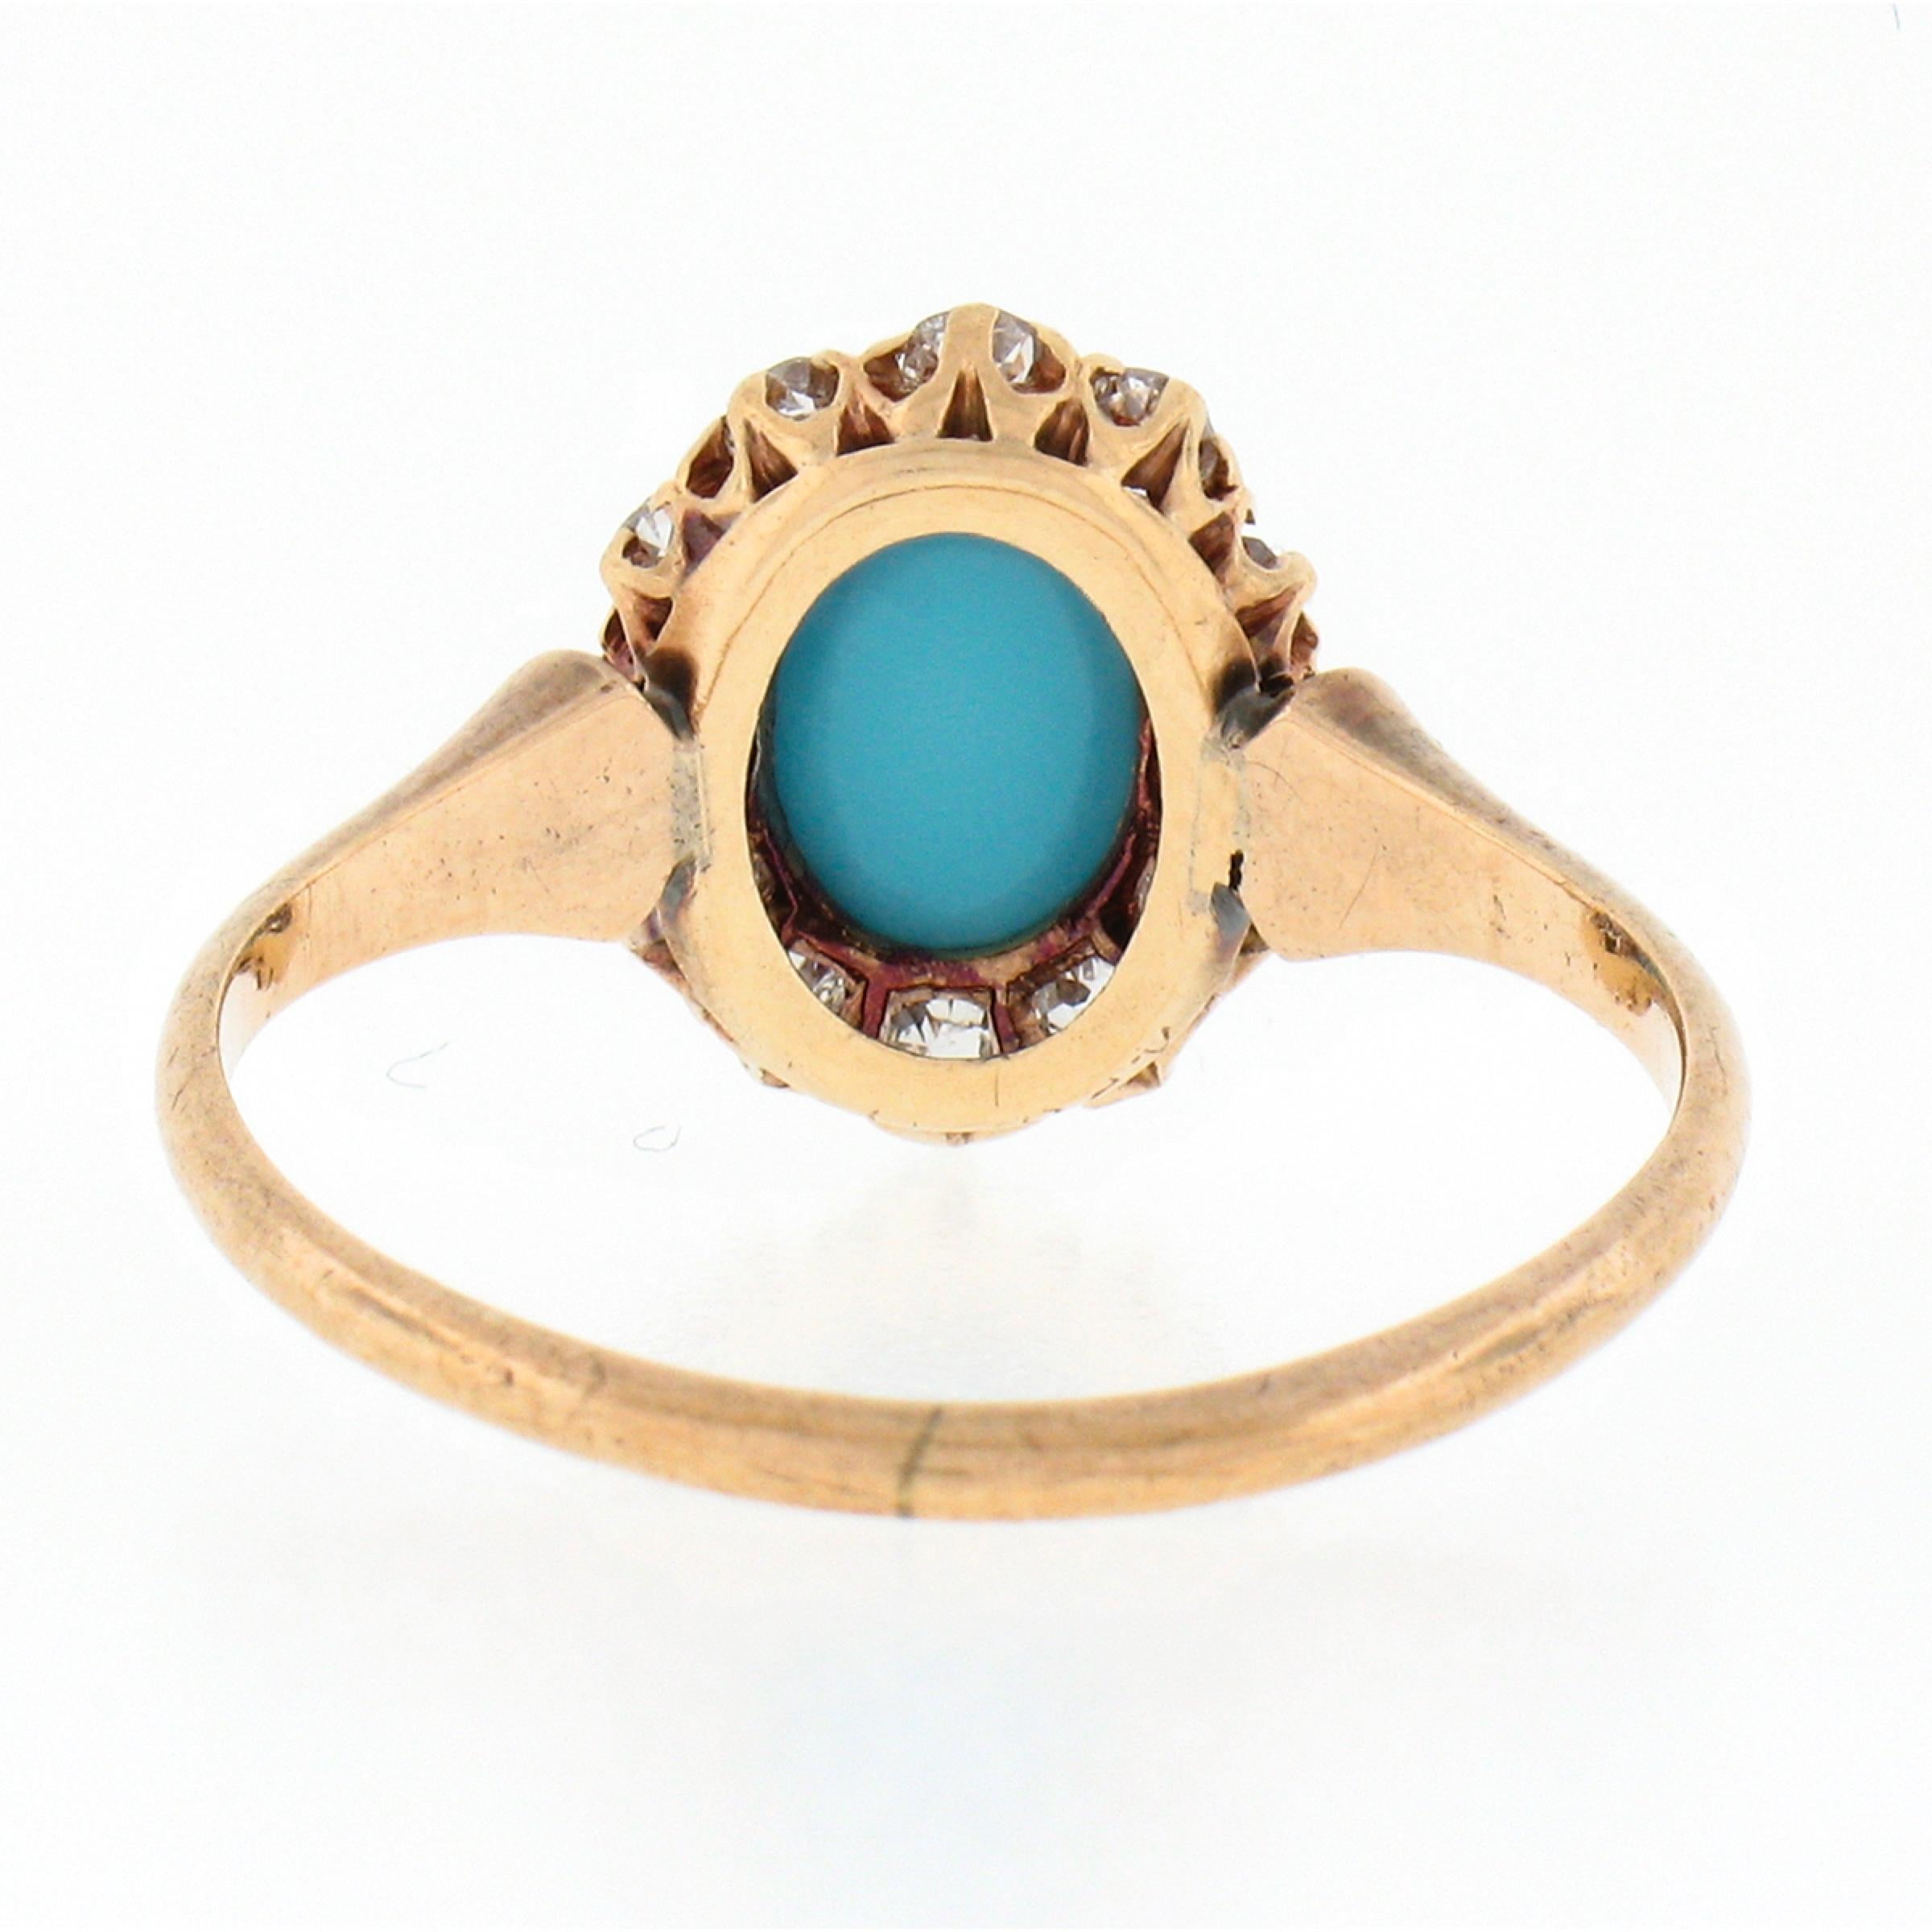 Antique Victorian 14k Gold Oval Cabochon Turquoise w/ Mine Cut Diamond Halo Ring 2